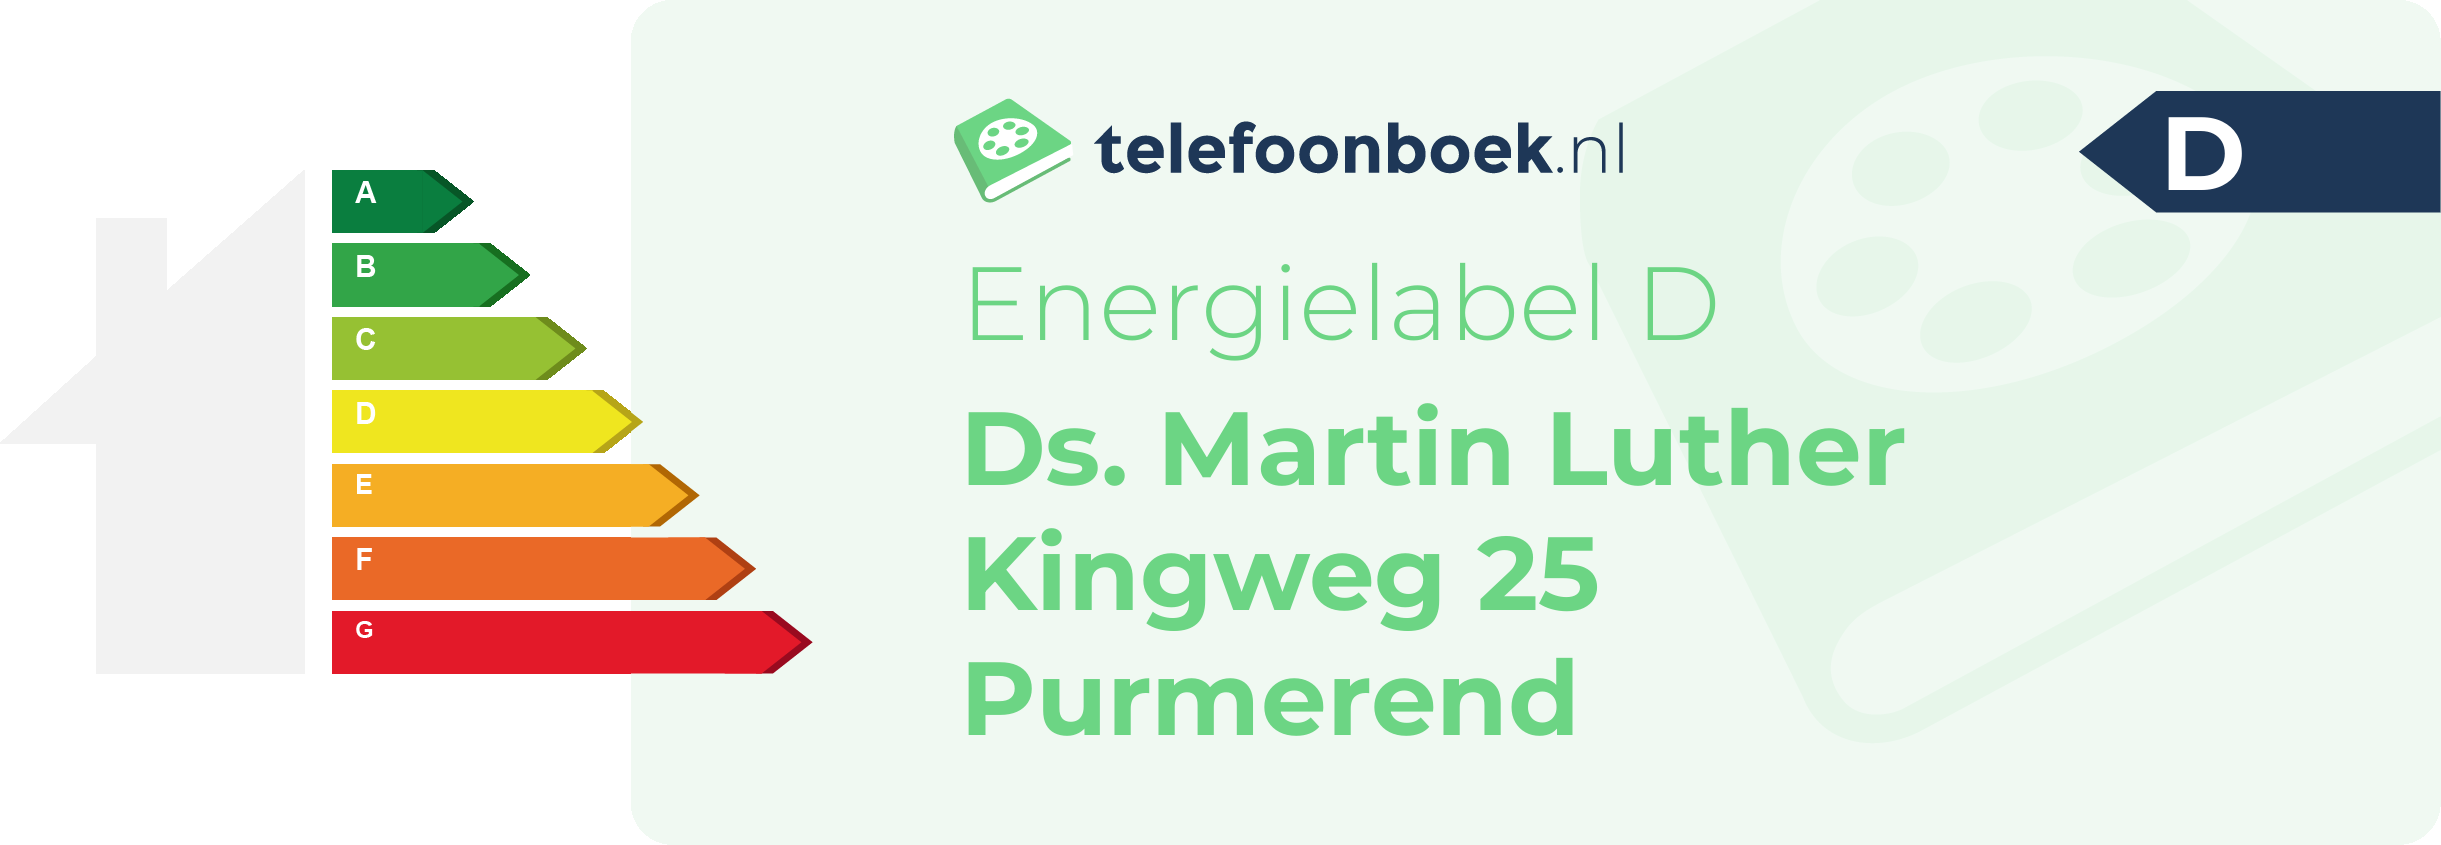 Energielabel Ds. Martin Luther Kingweg 25 Purmerend